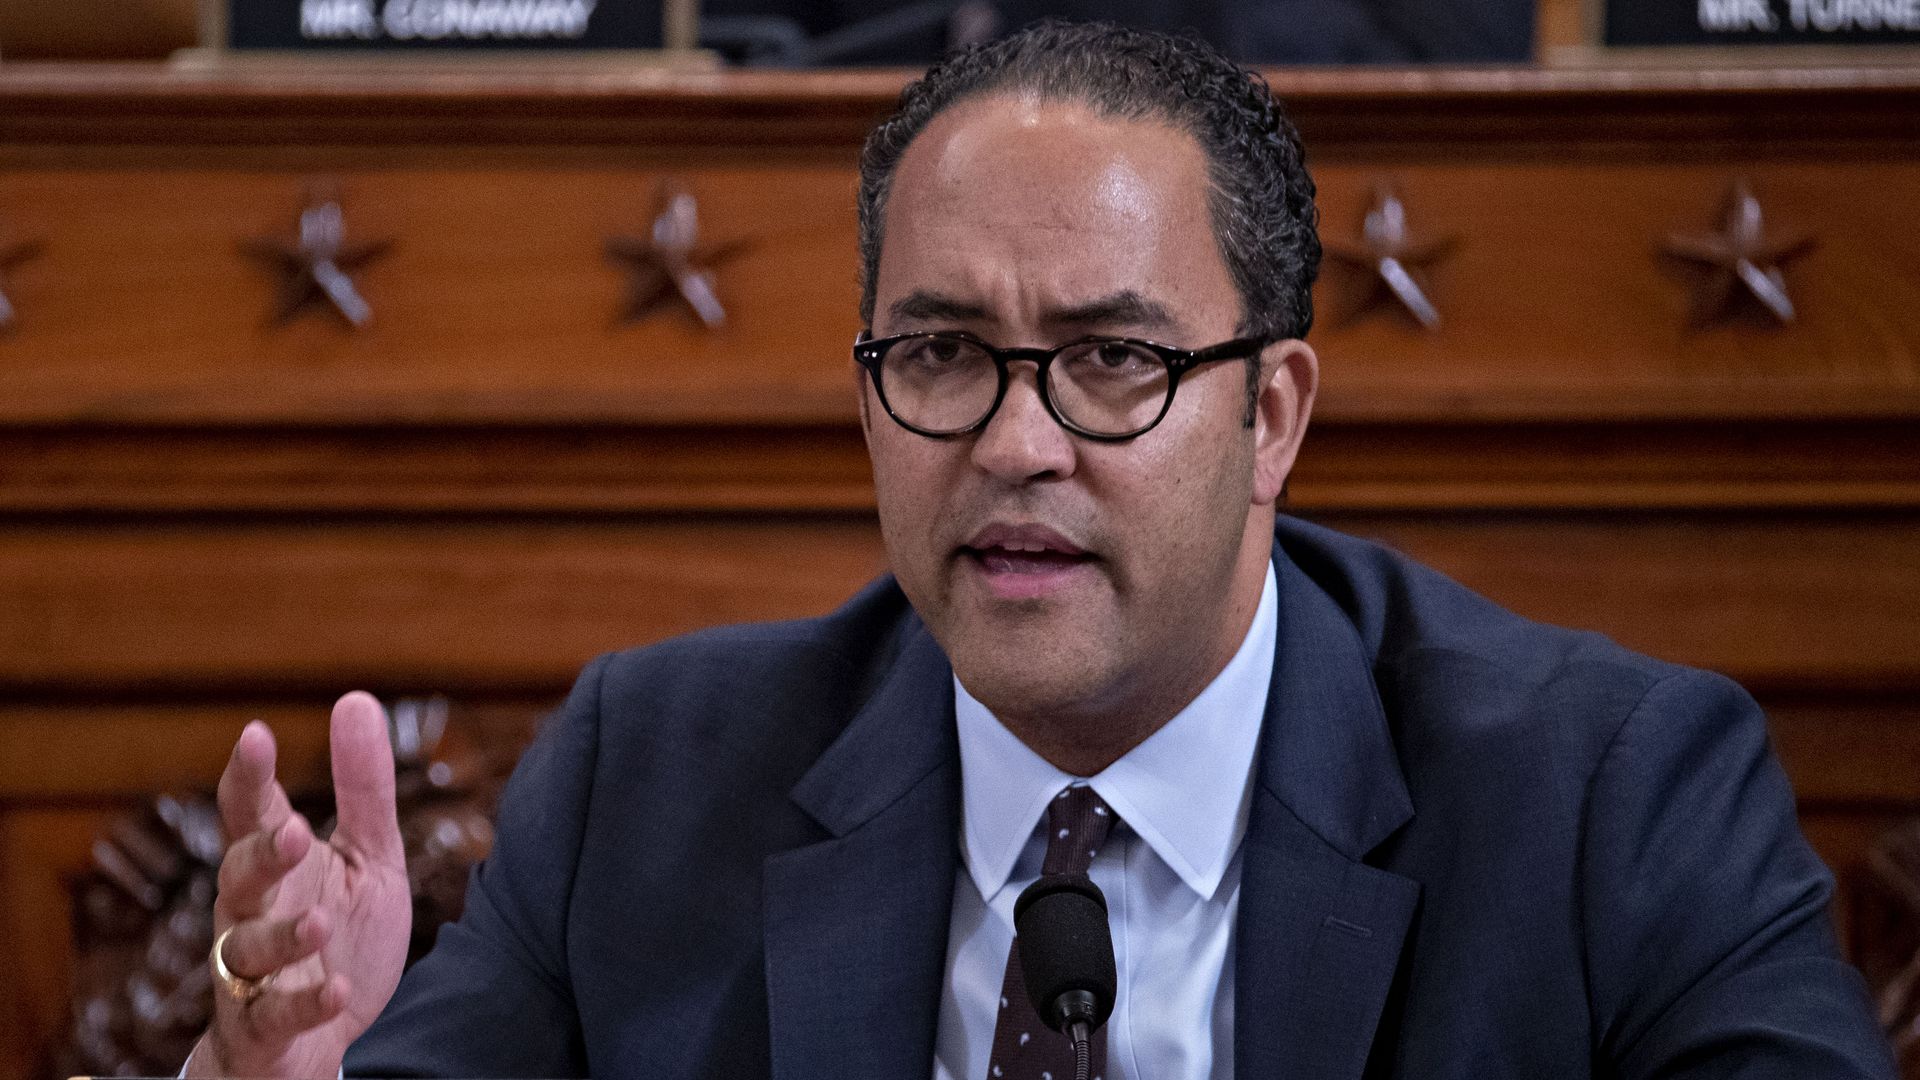 Former Rep. Will Hurd is seen speaking during a congressional hearing.